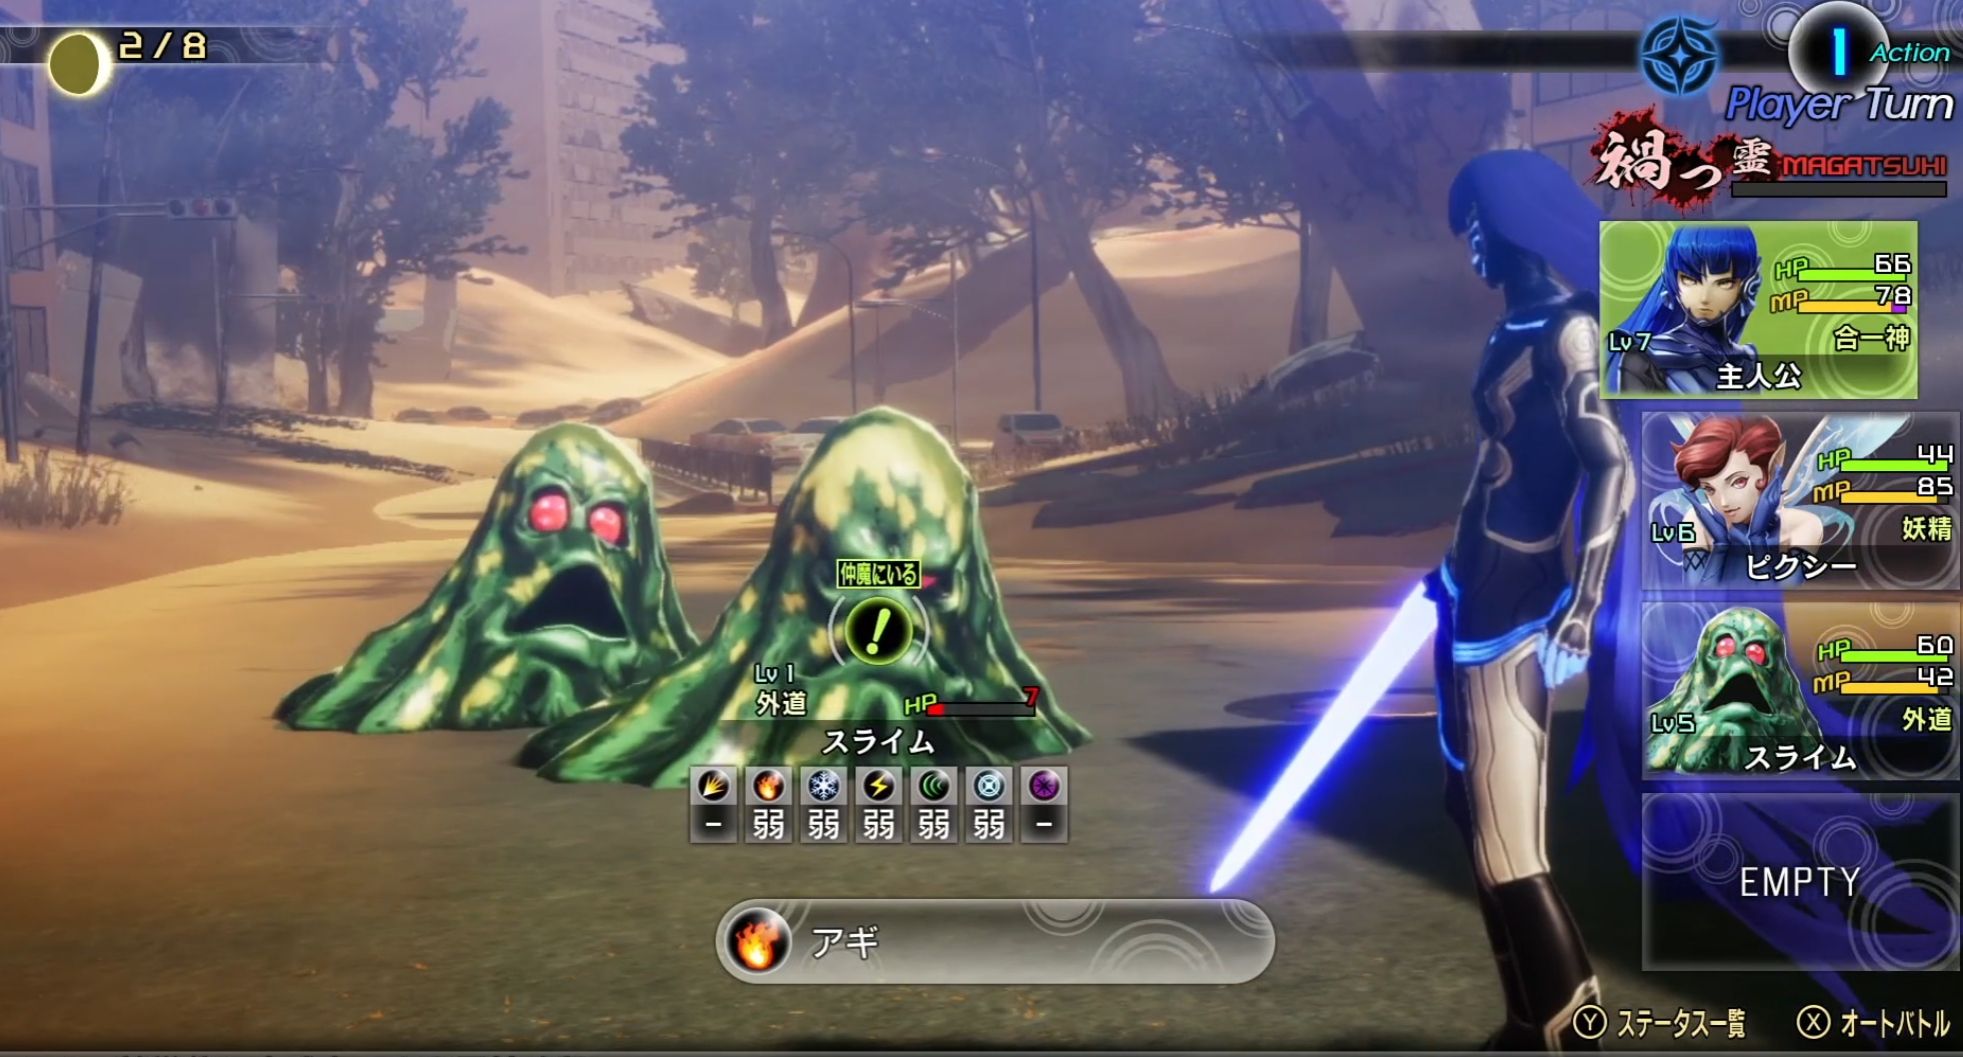 The player stares down a slime in Shin Megami Tensei V's Press Turn combat system.